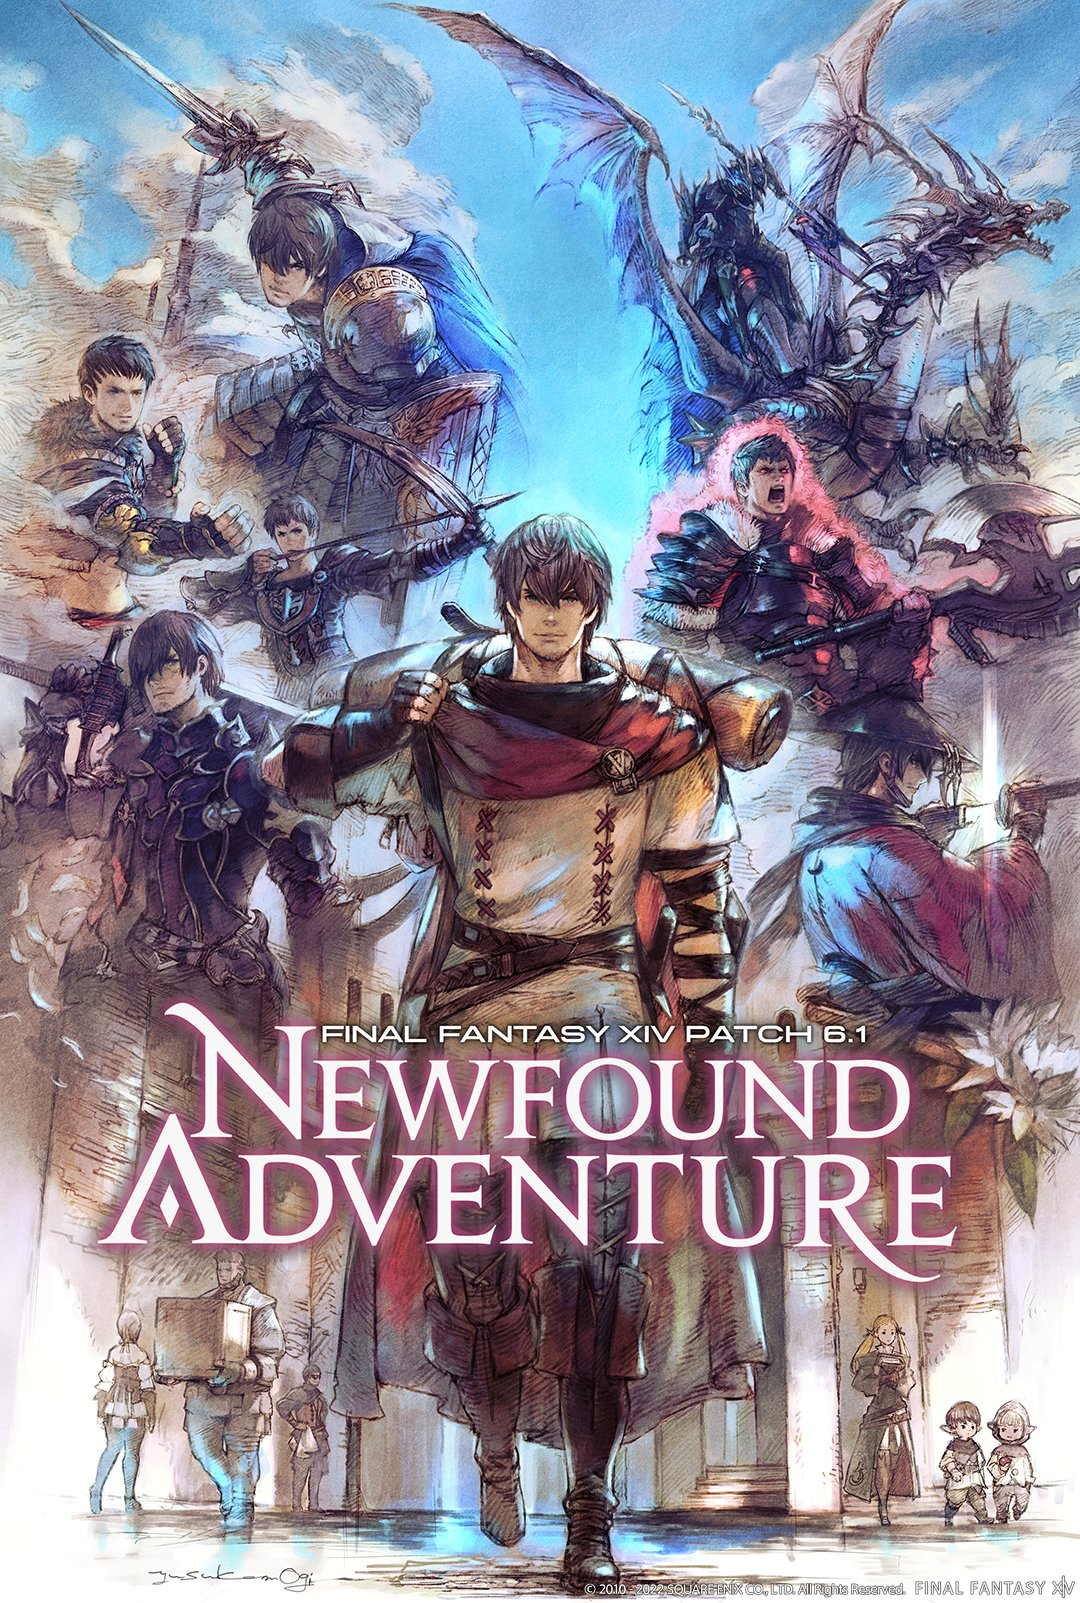 The official artwork for Newfound Adventure, showing a Warrior of Light walking back into the life of a wandering thrillseeker, leaving echoes of their prior jobs behind. (Image: Square-Enix)